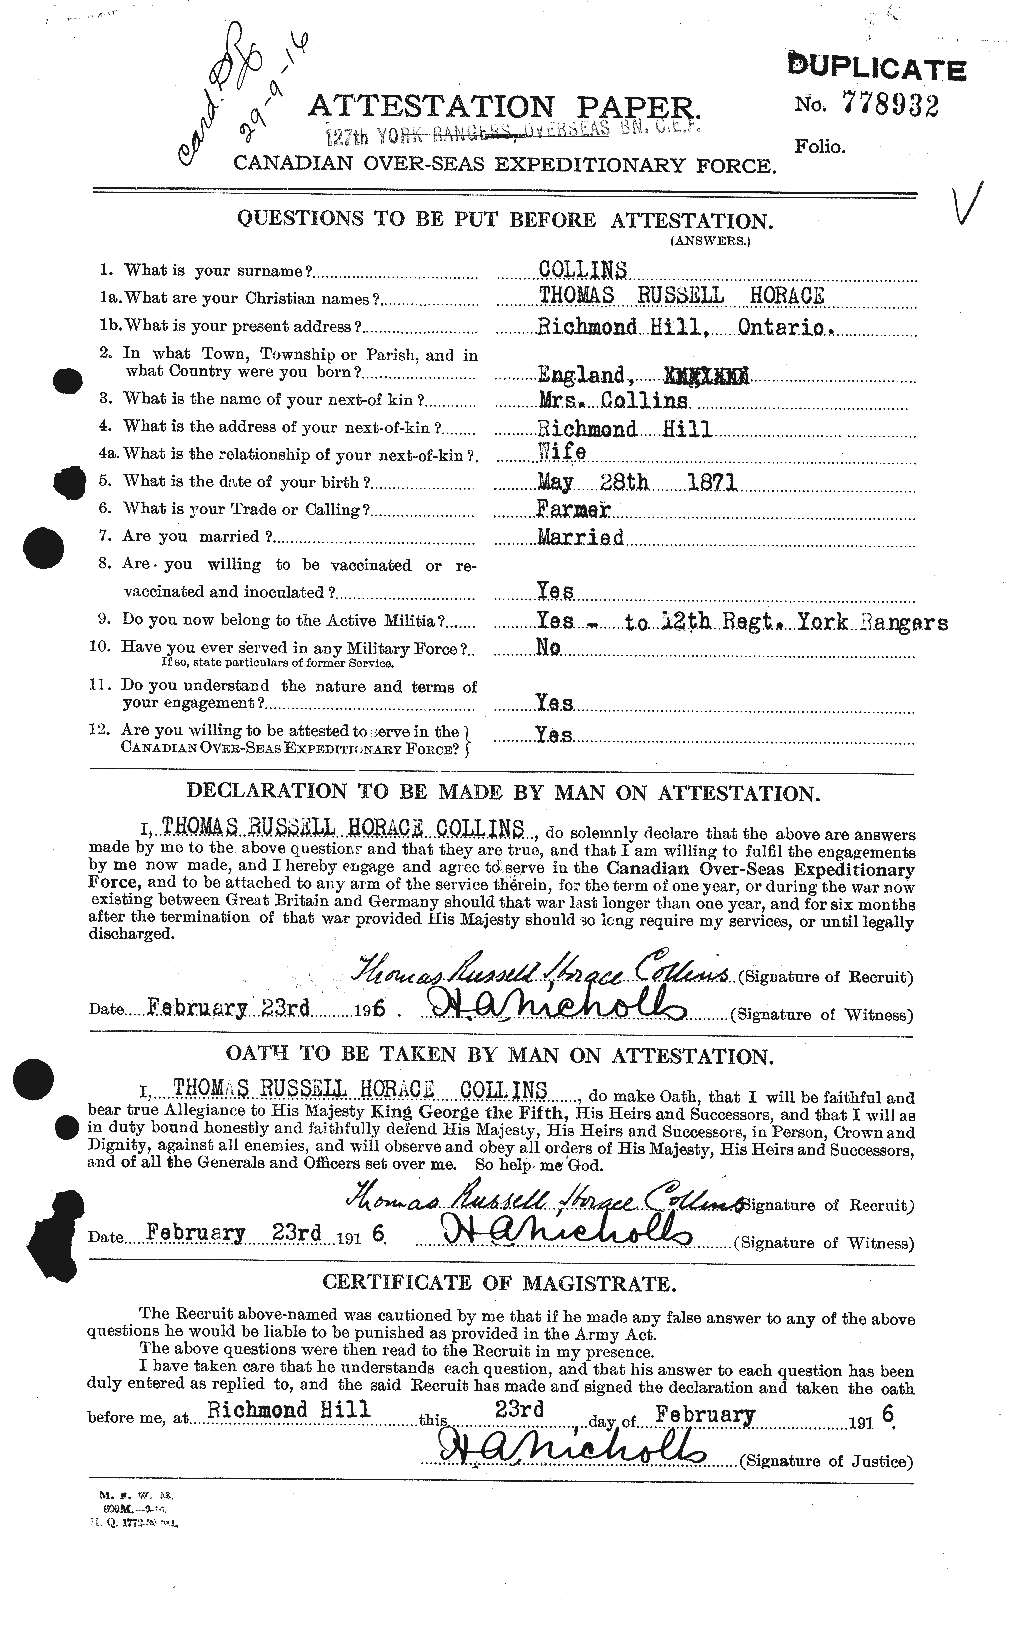 Personnel Records of the First World War - CEF 069120a